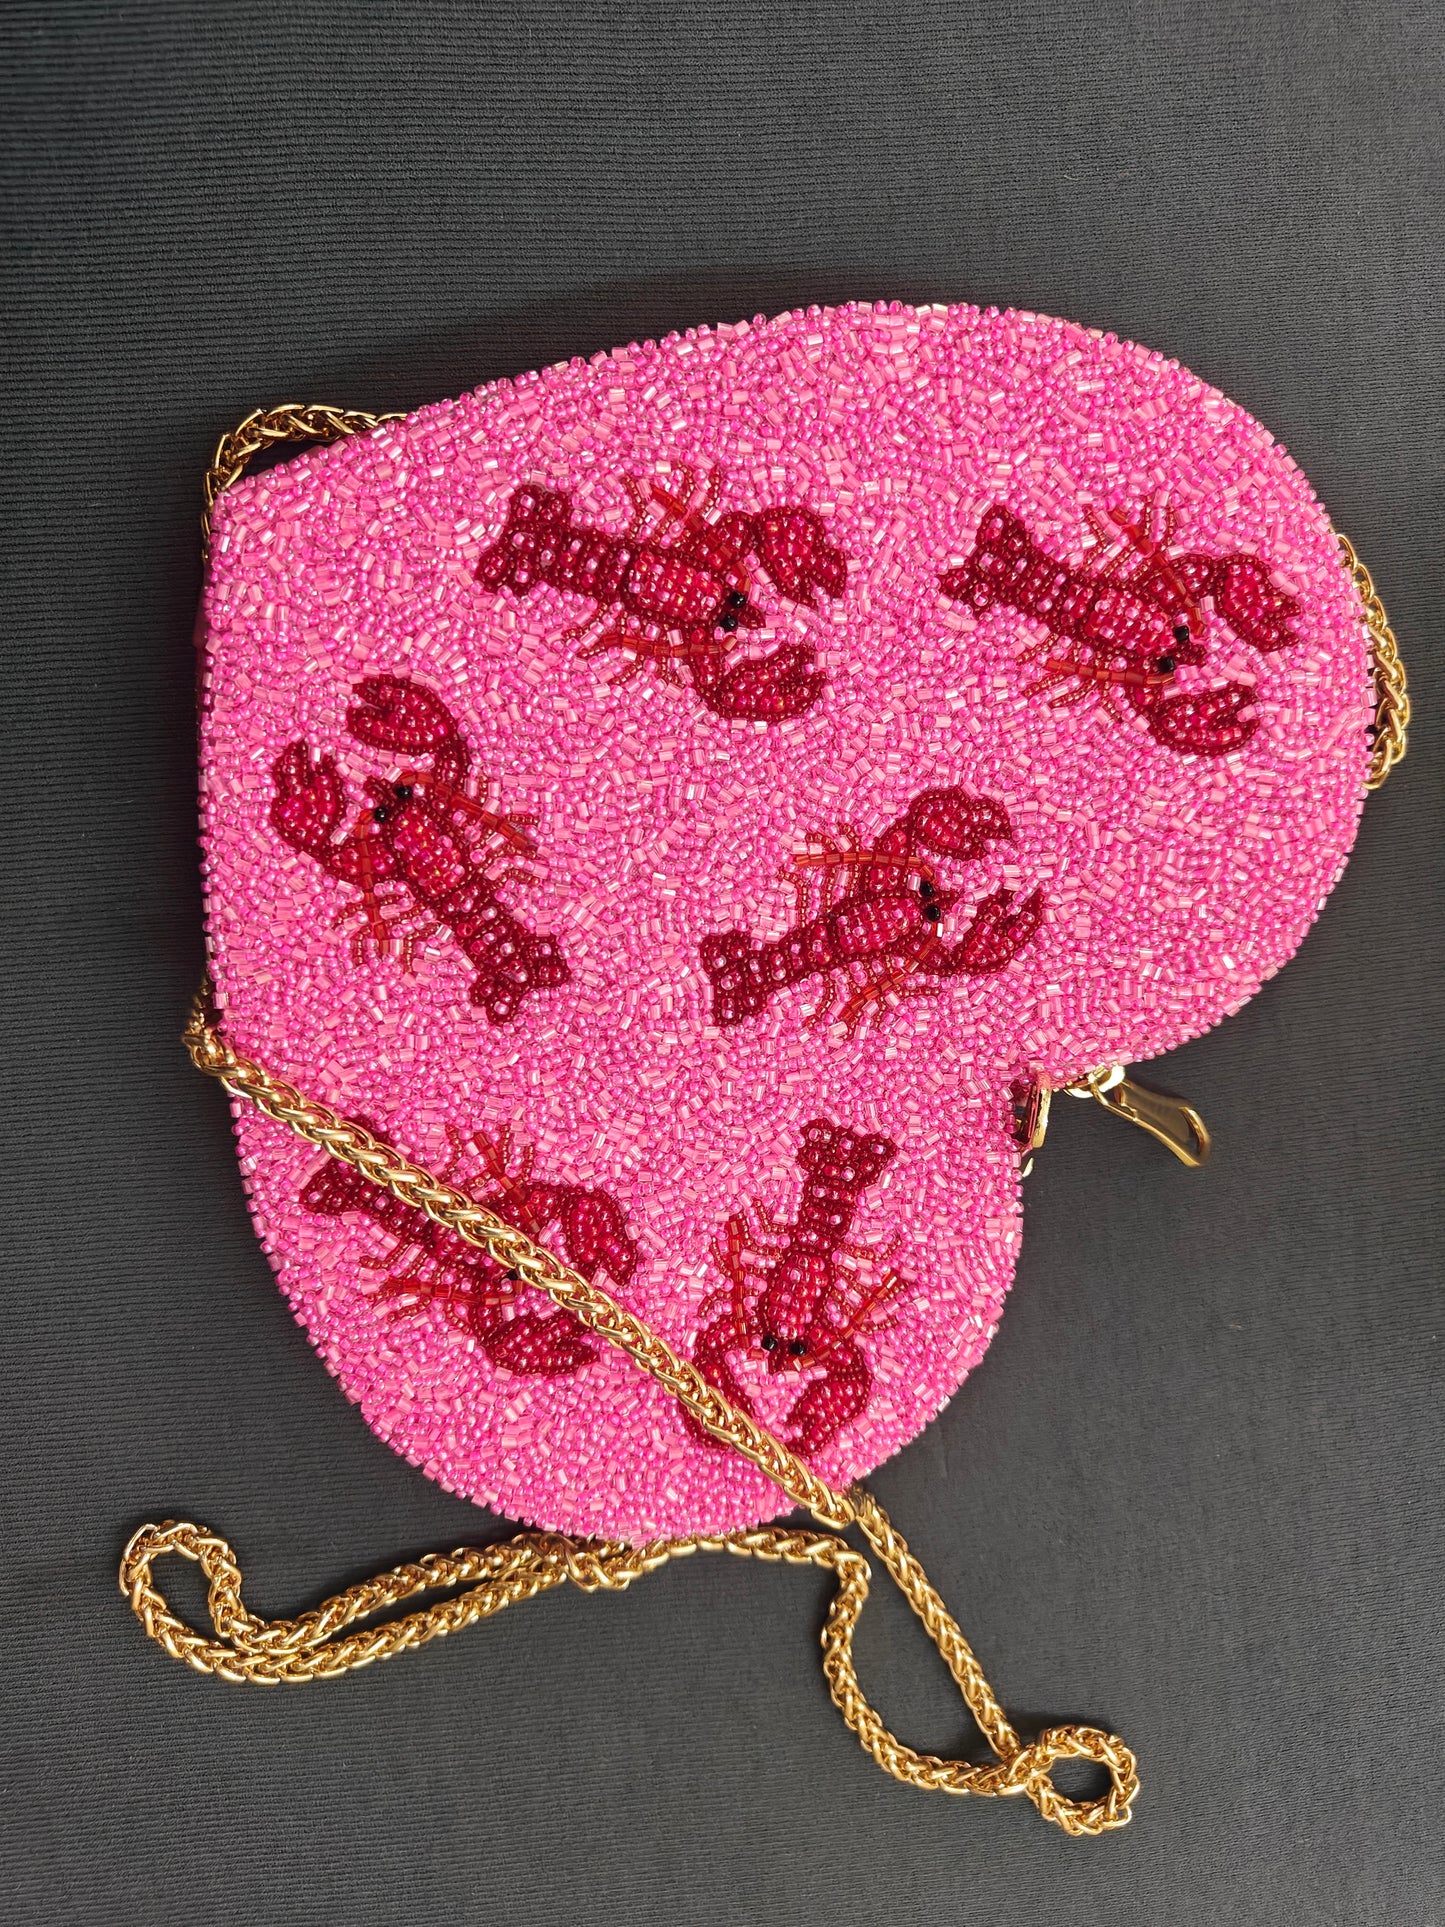 HEART BAG LOBSTER PINK AND RED - ADULT